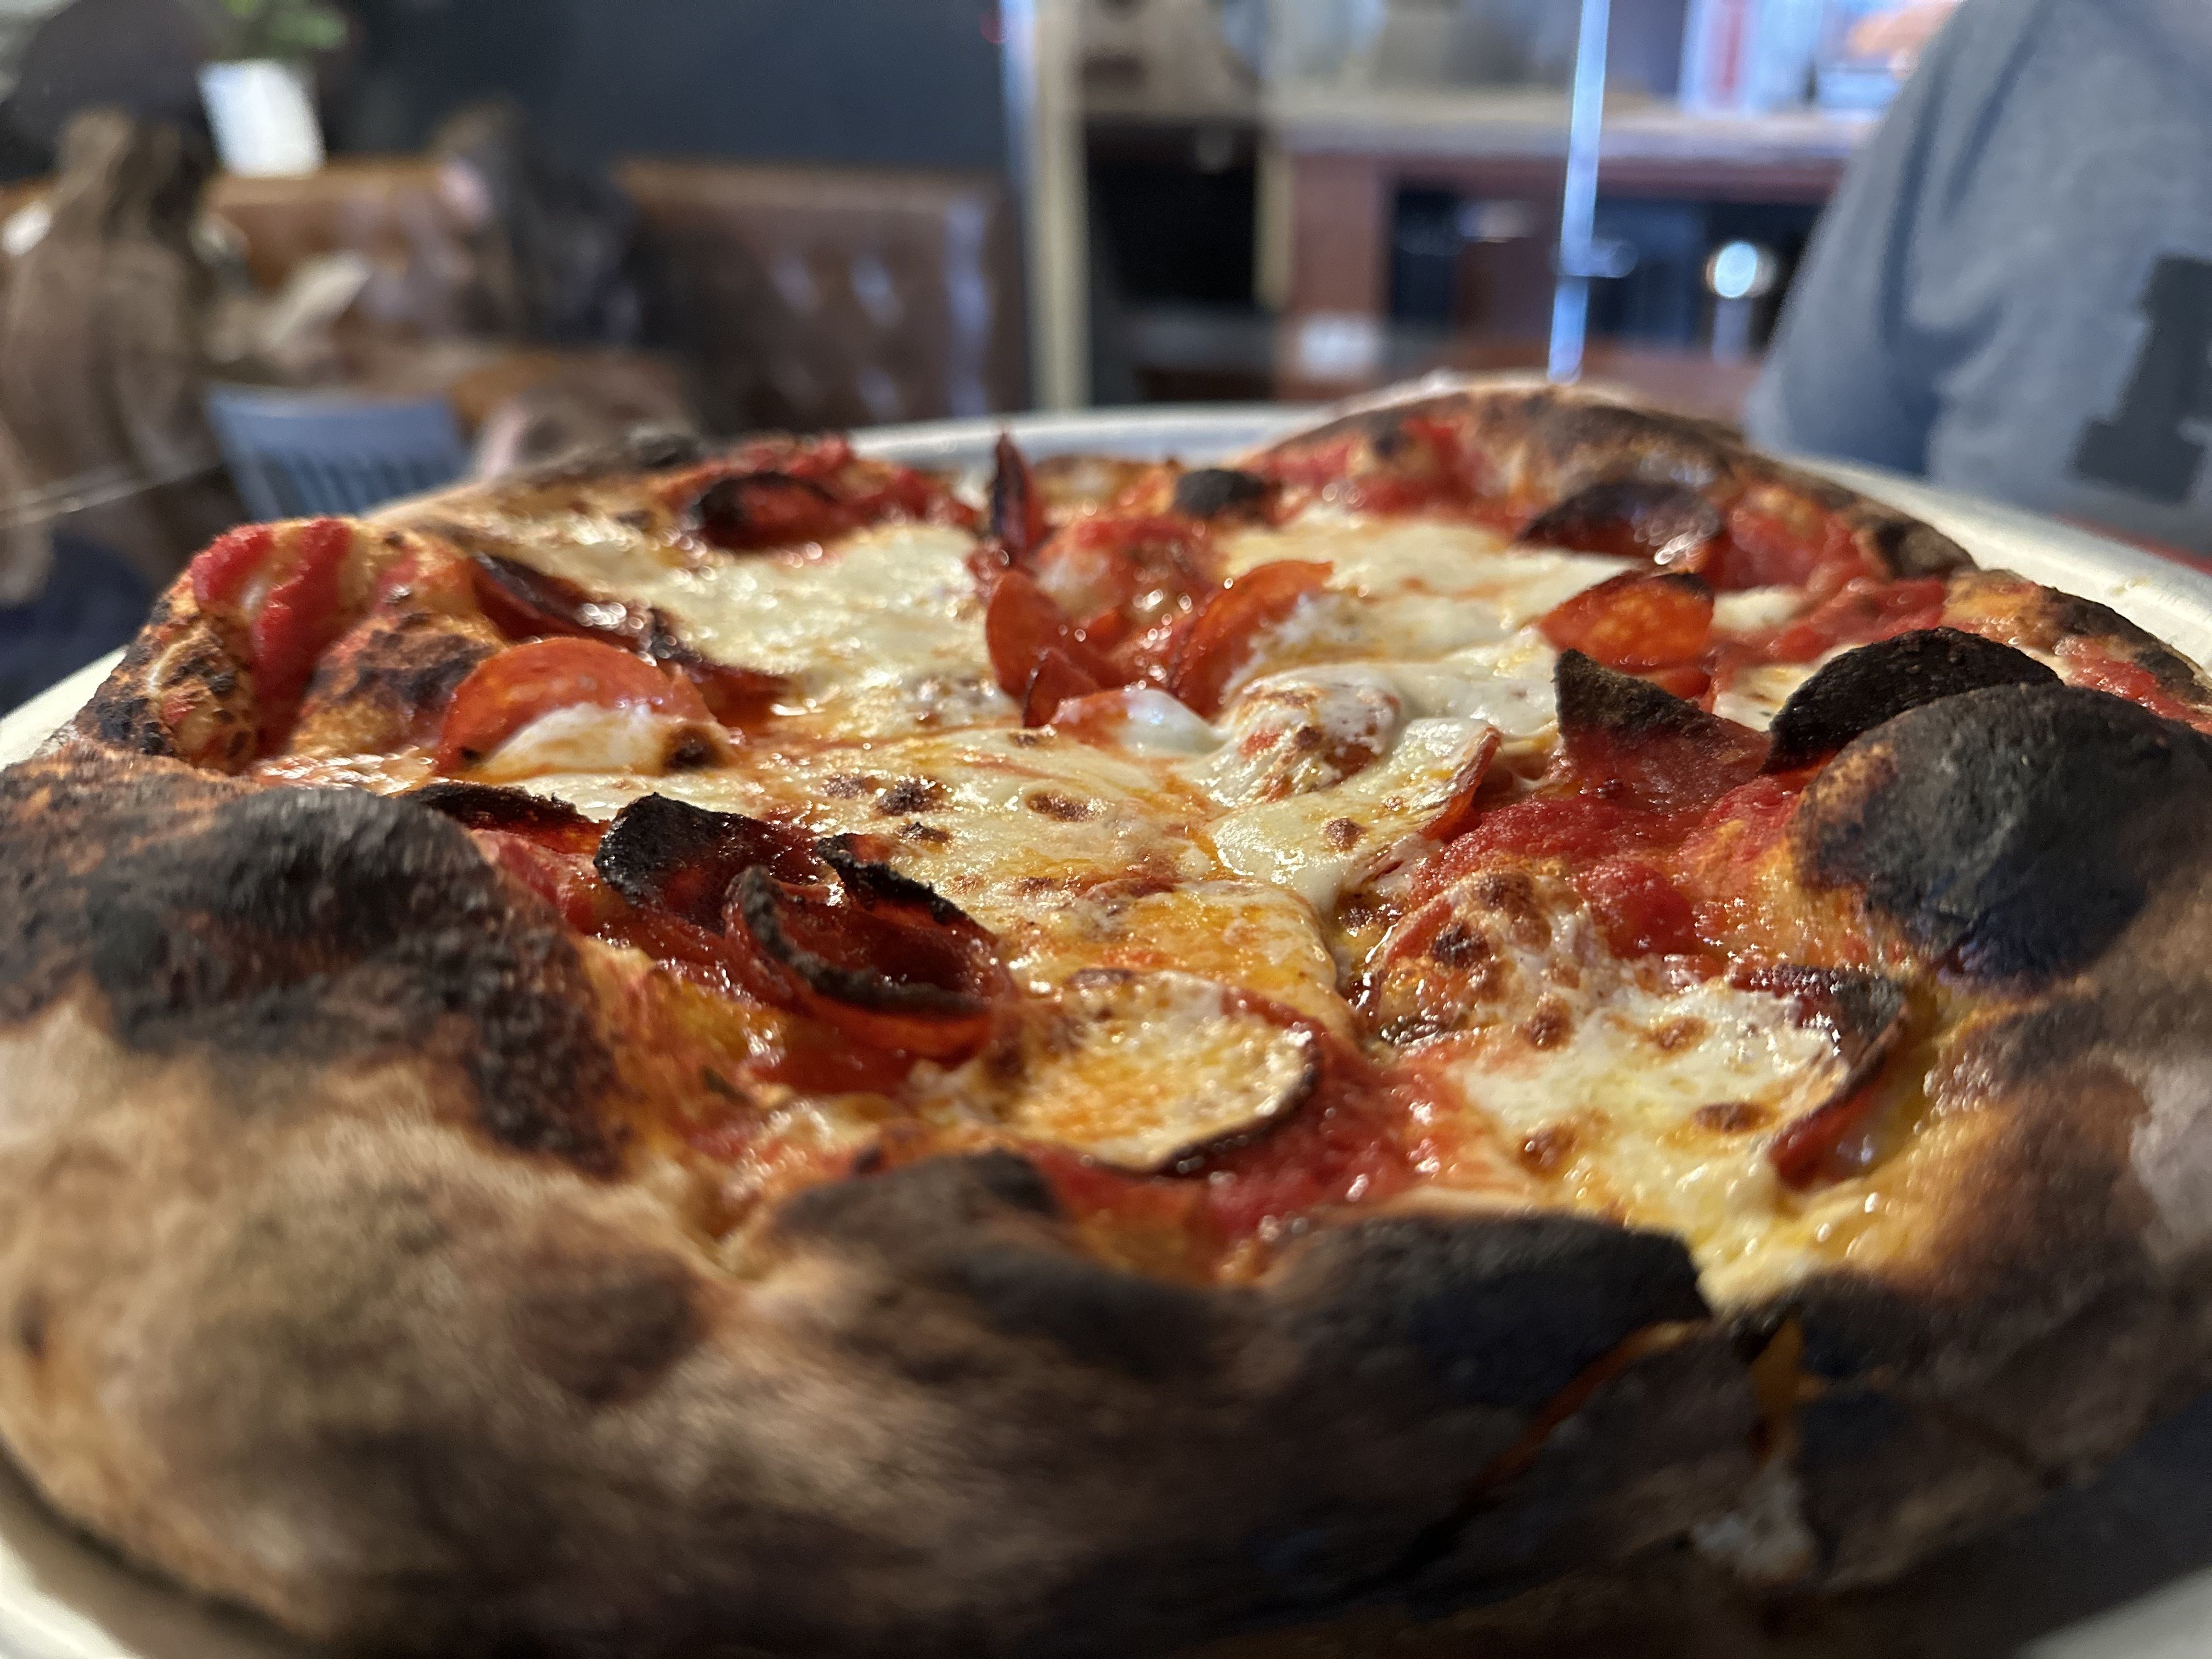 A close up of a pepperoni pizza pie with a charred, wood-fired crust at Picco in Boston.